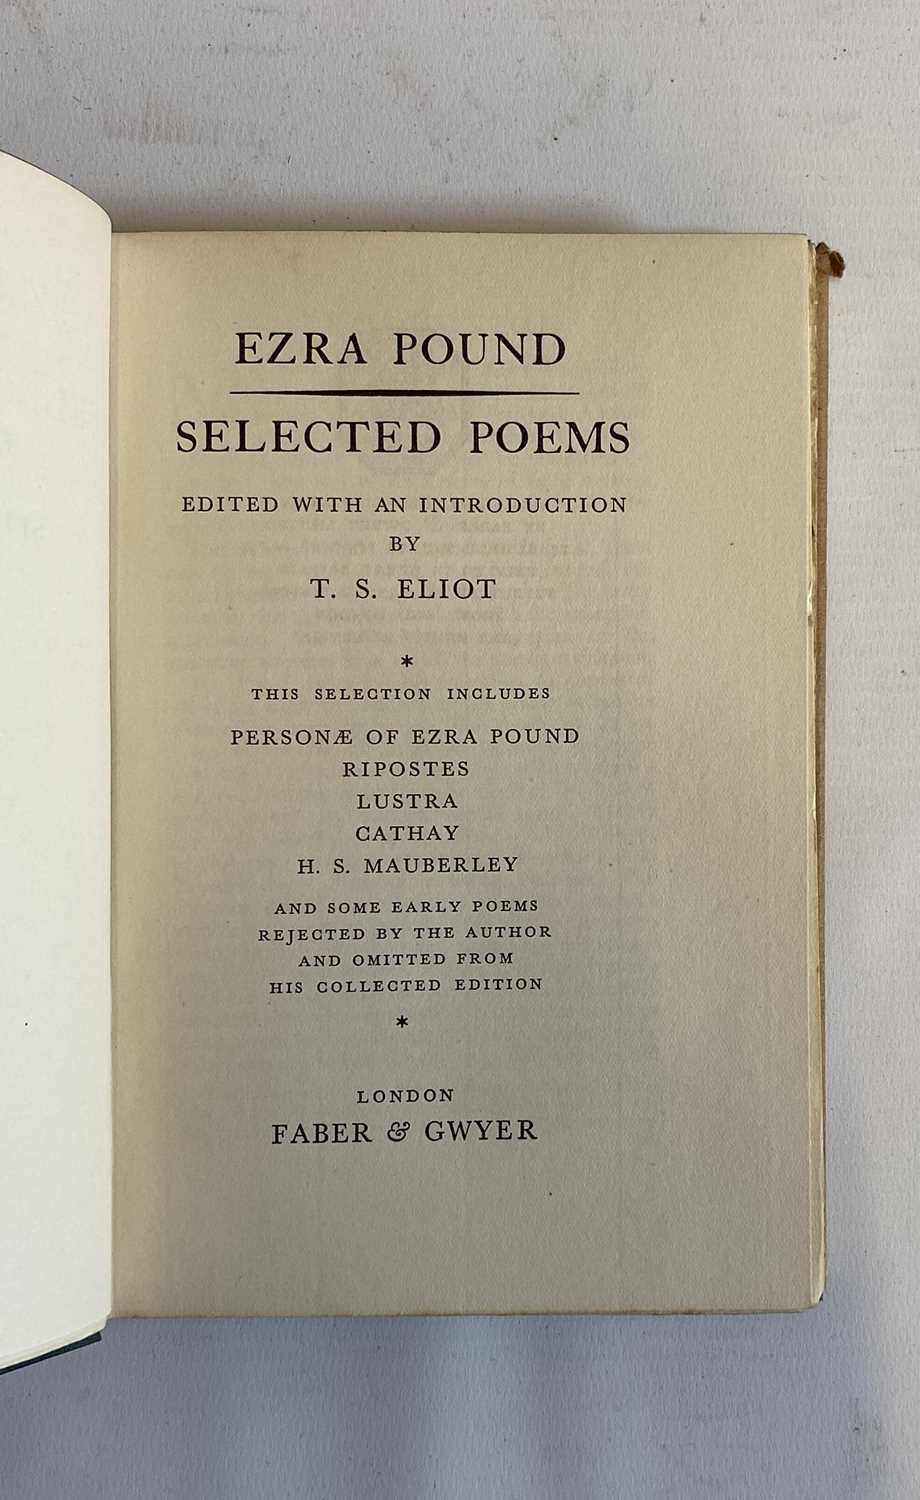 EZRA POUND, SELECTED POEMS, edited by T S Eliot, 1928, Faber and Gwyer, Very good in a fair, torn - Image 2 of 9